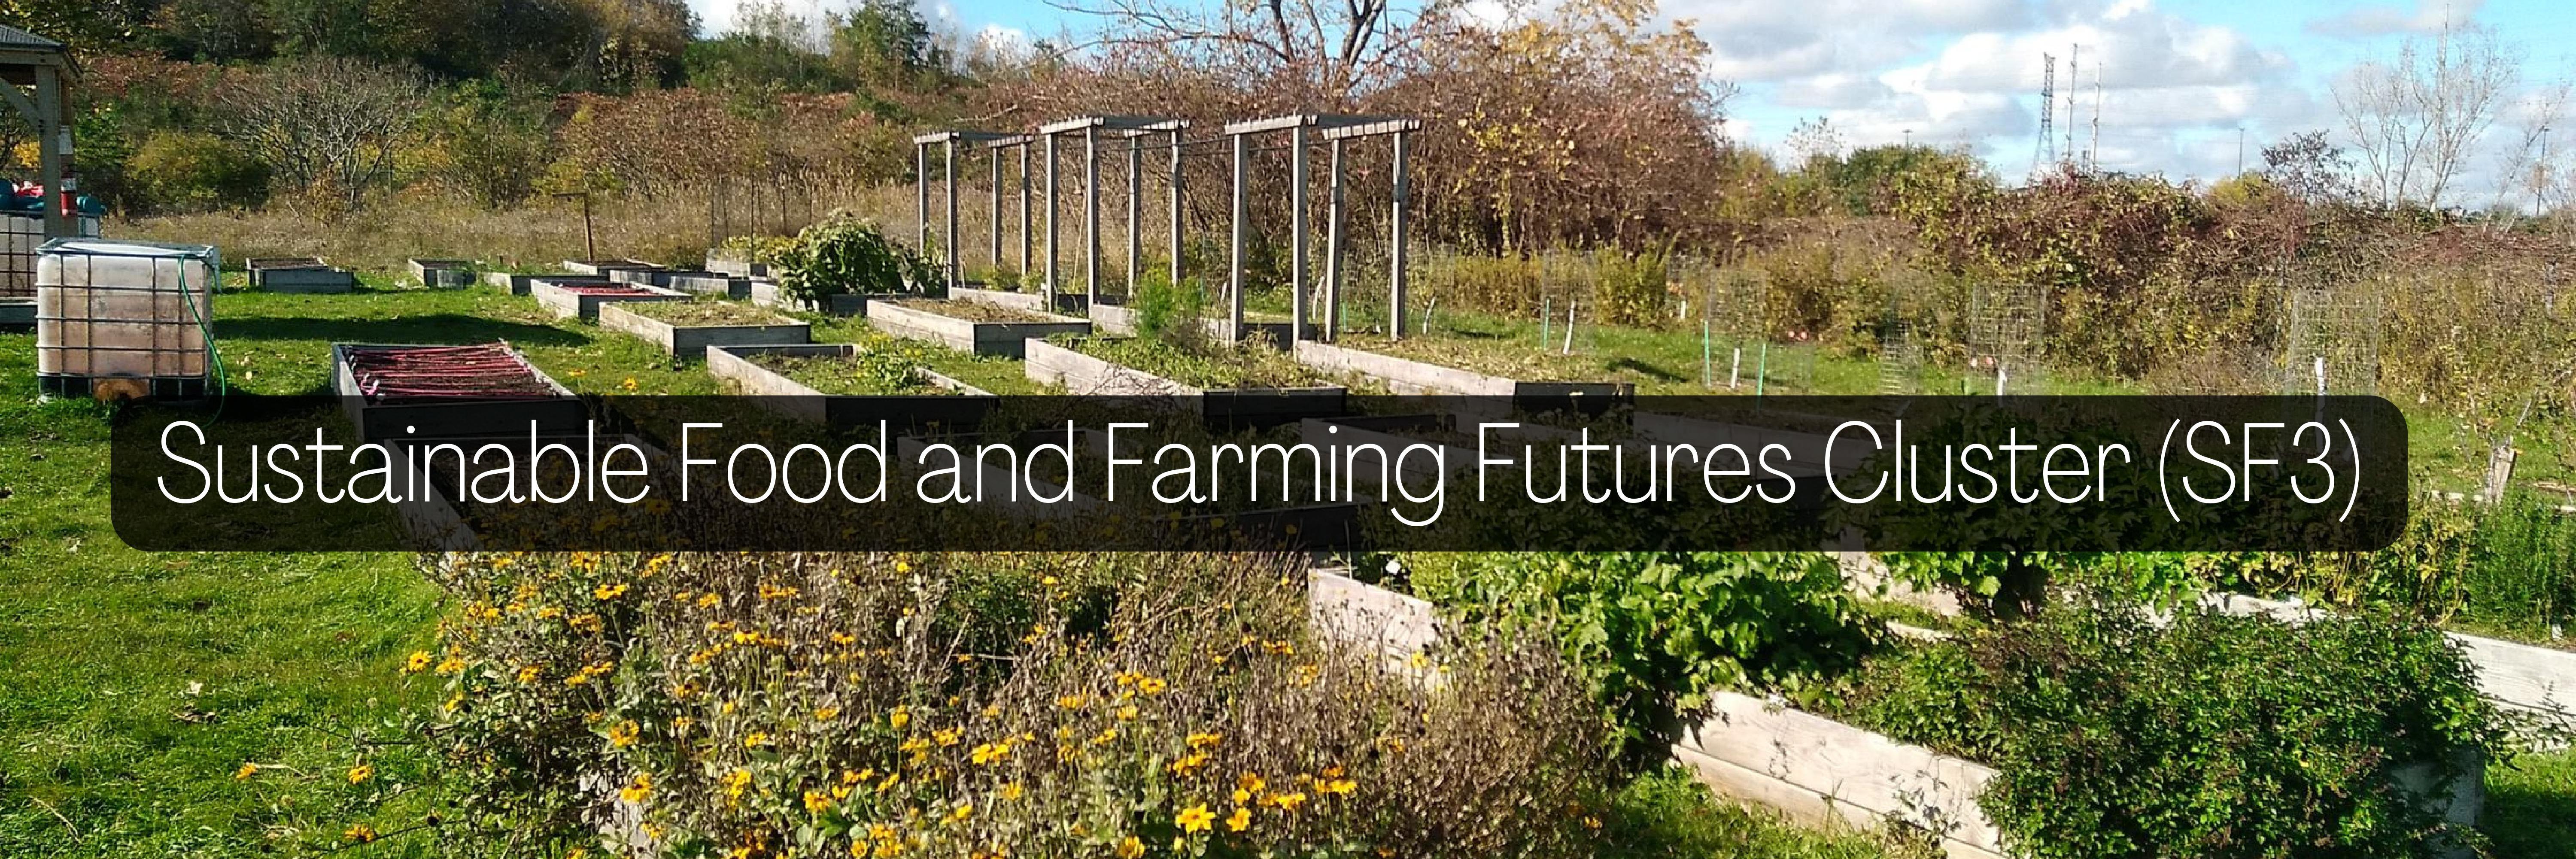 image of gardens with words Sustainable Food and Farming Futures Cluster overlaid